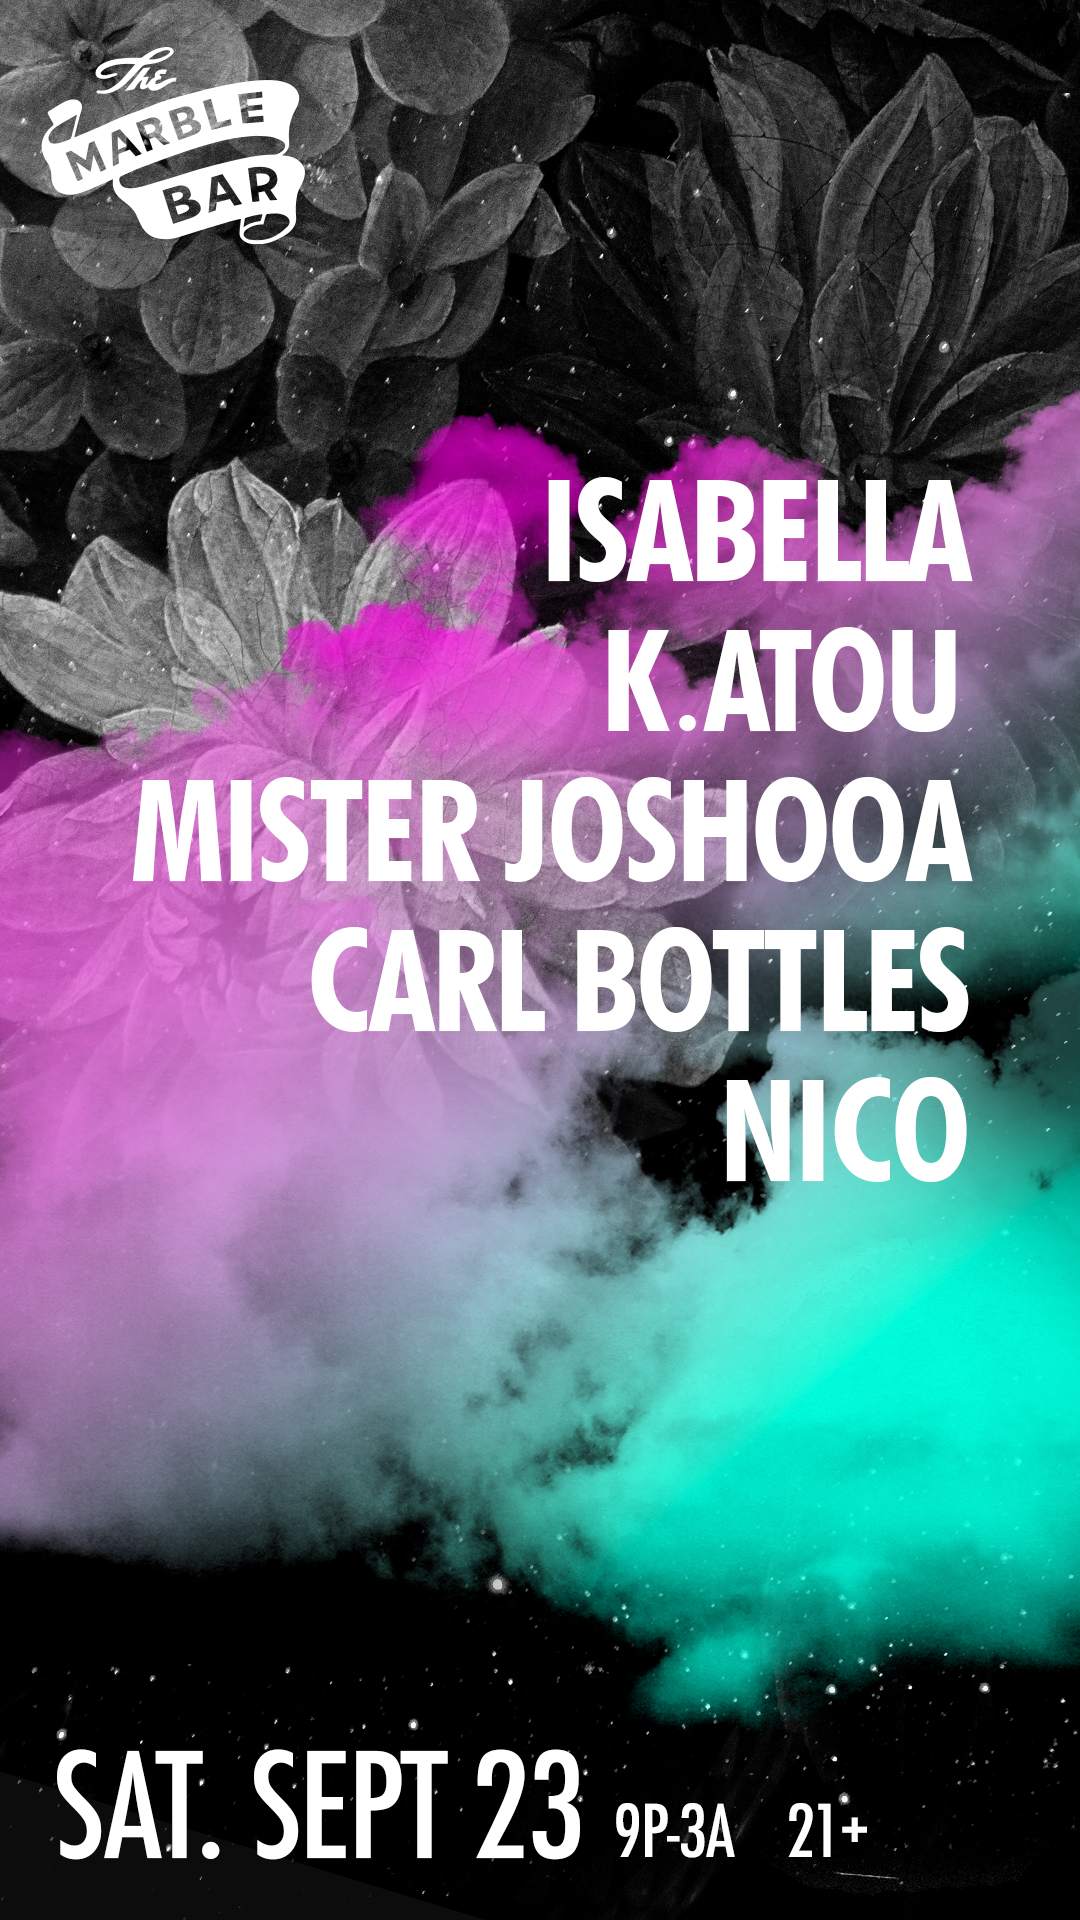 ISAbella with K.atou, Mister Joshooa, Carl Bottles and Nico - フライヤー表